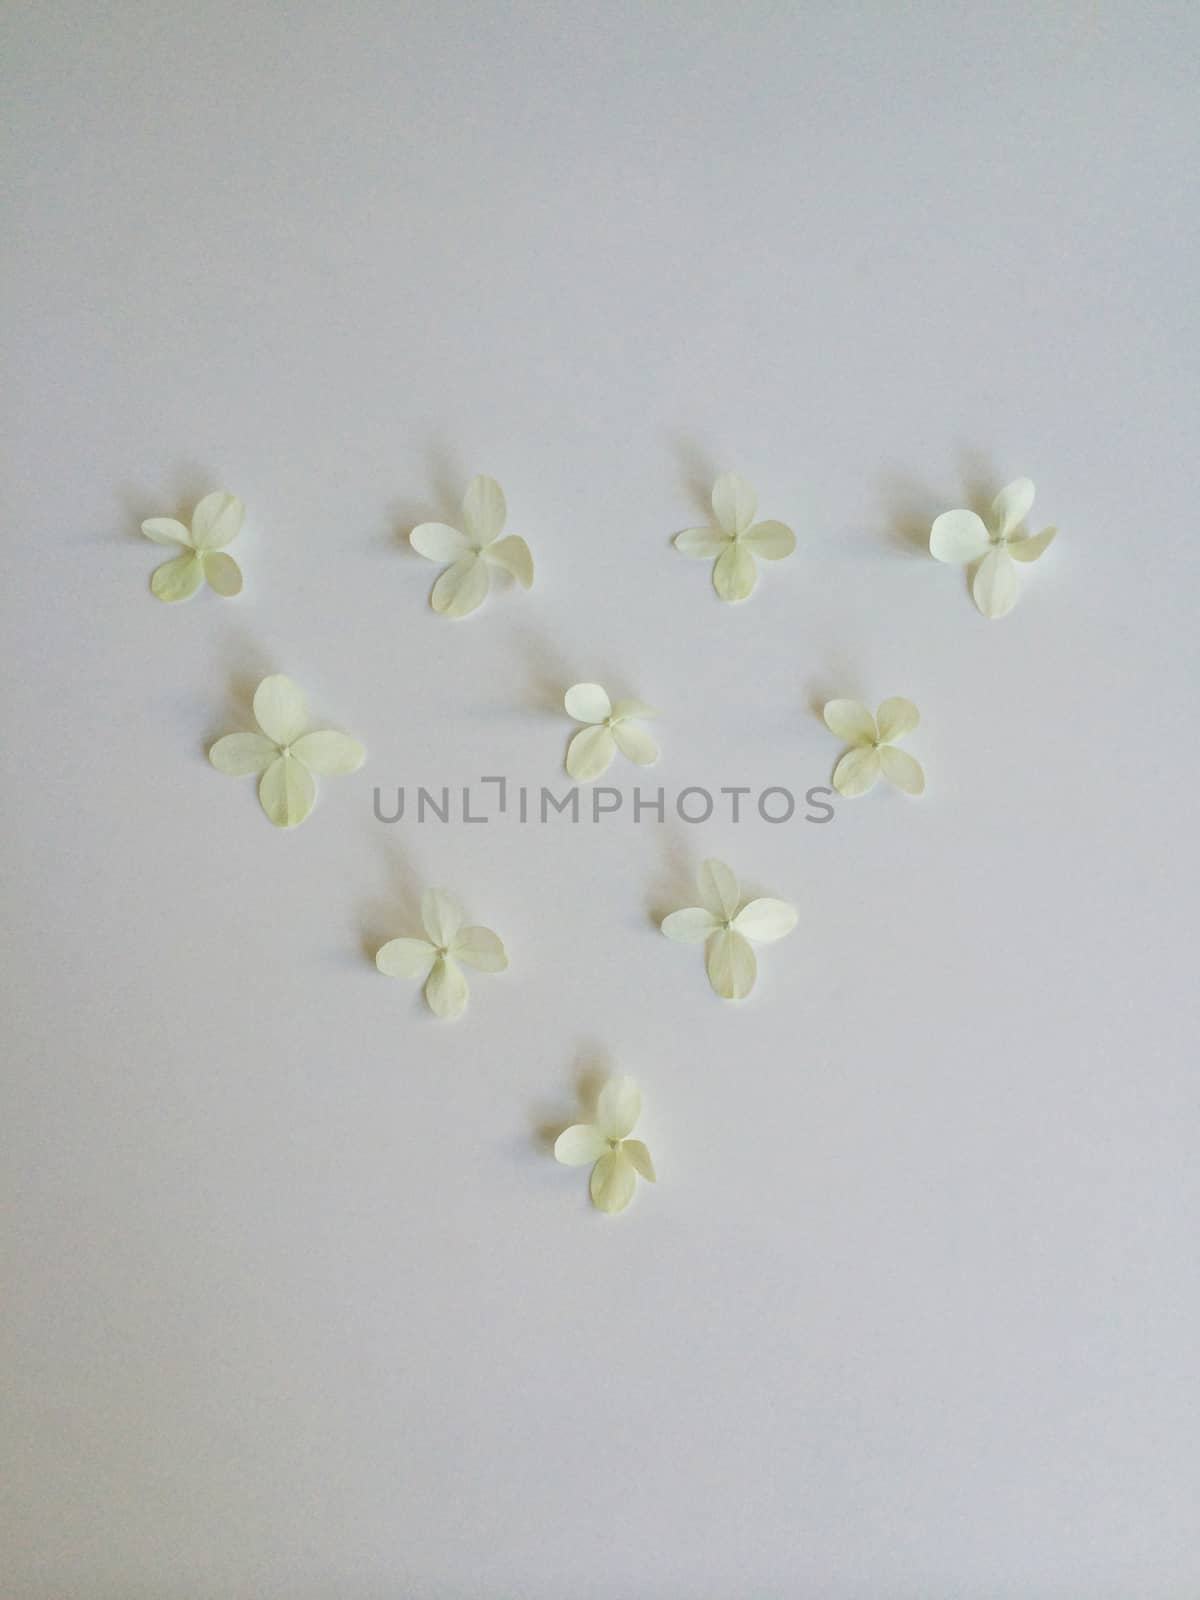 Ten hydrangea flowers laid out in a triangle pattern